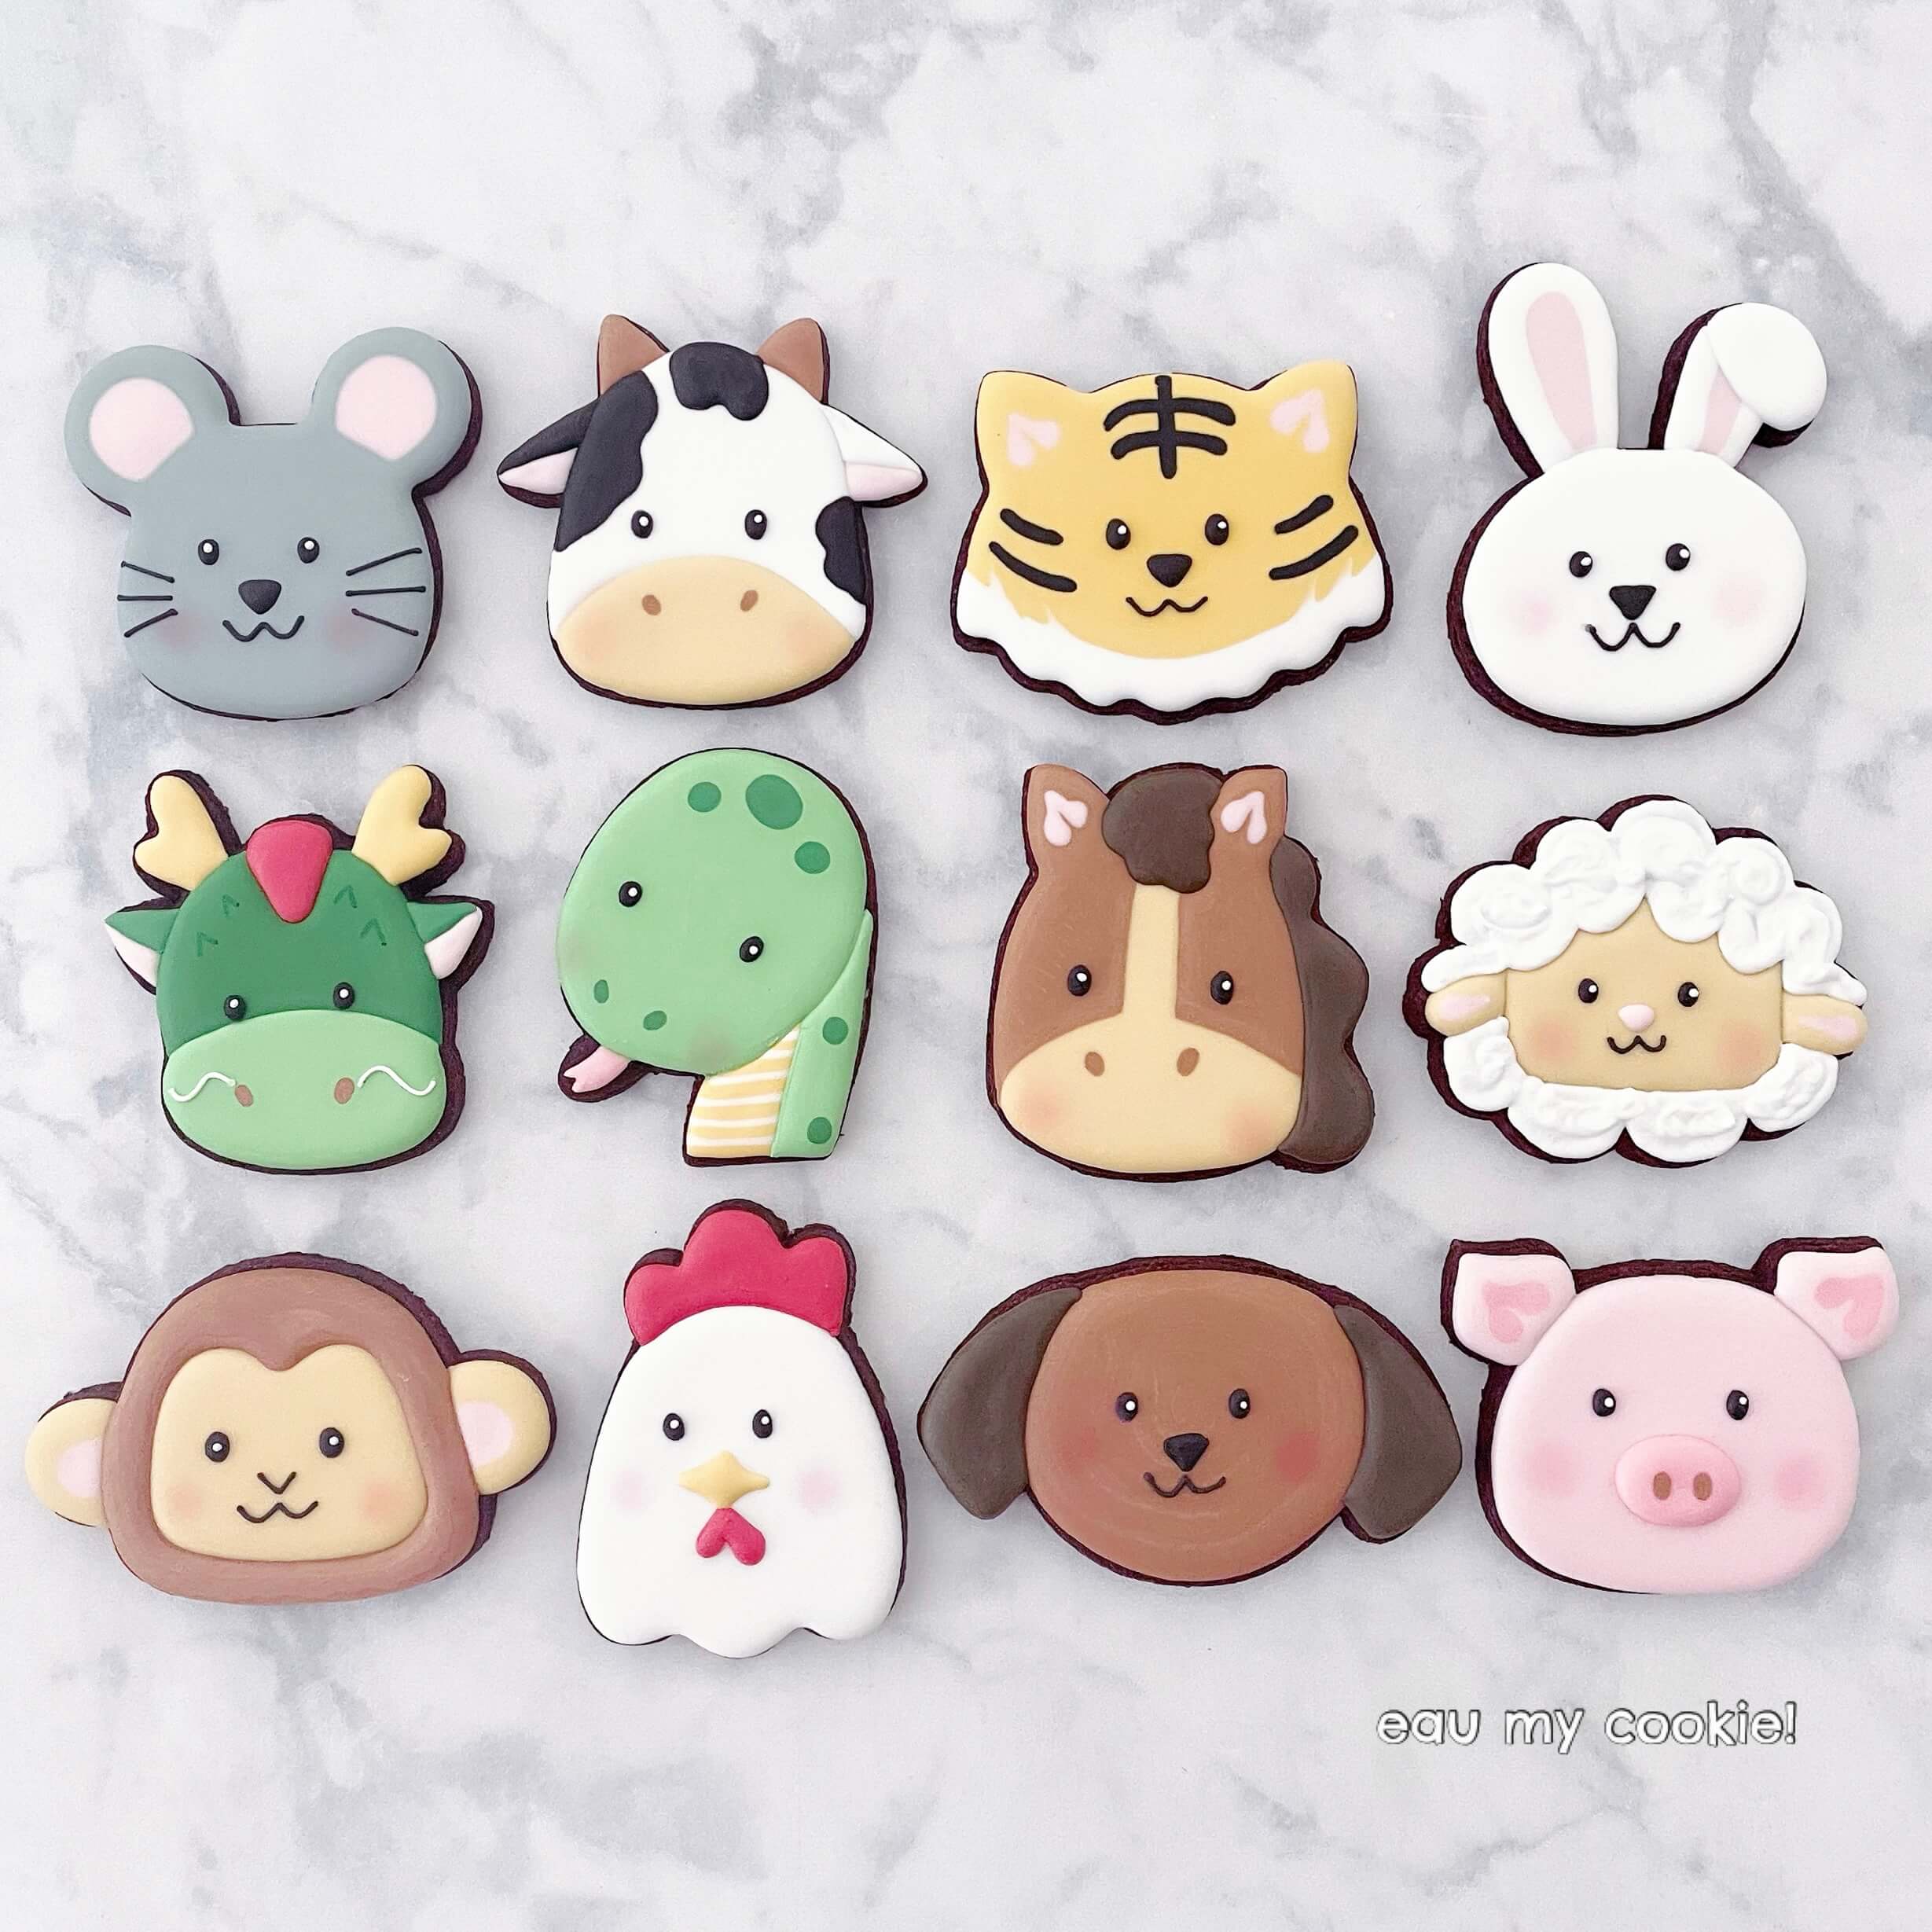 Chinese Zodiac Animals (12 cutters) - eau my cookie! Singapore Cookie Artist